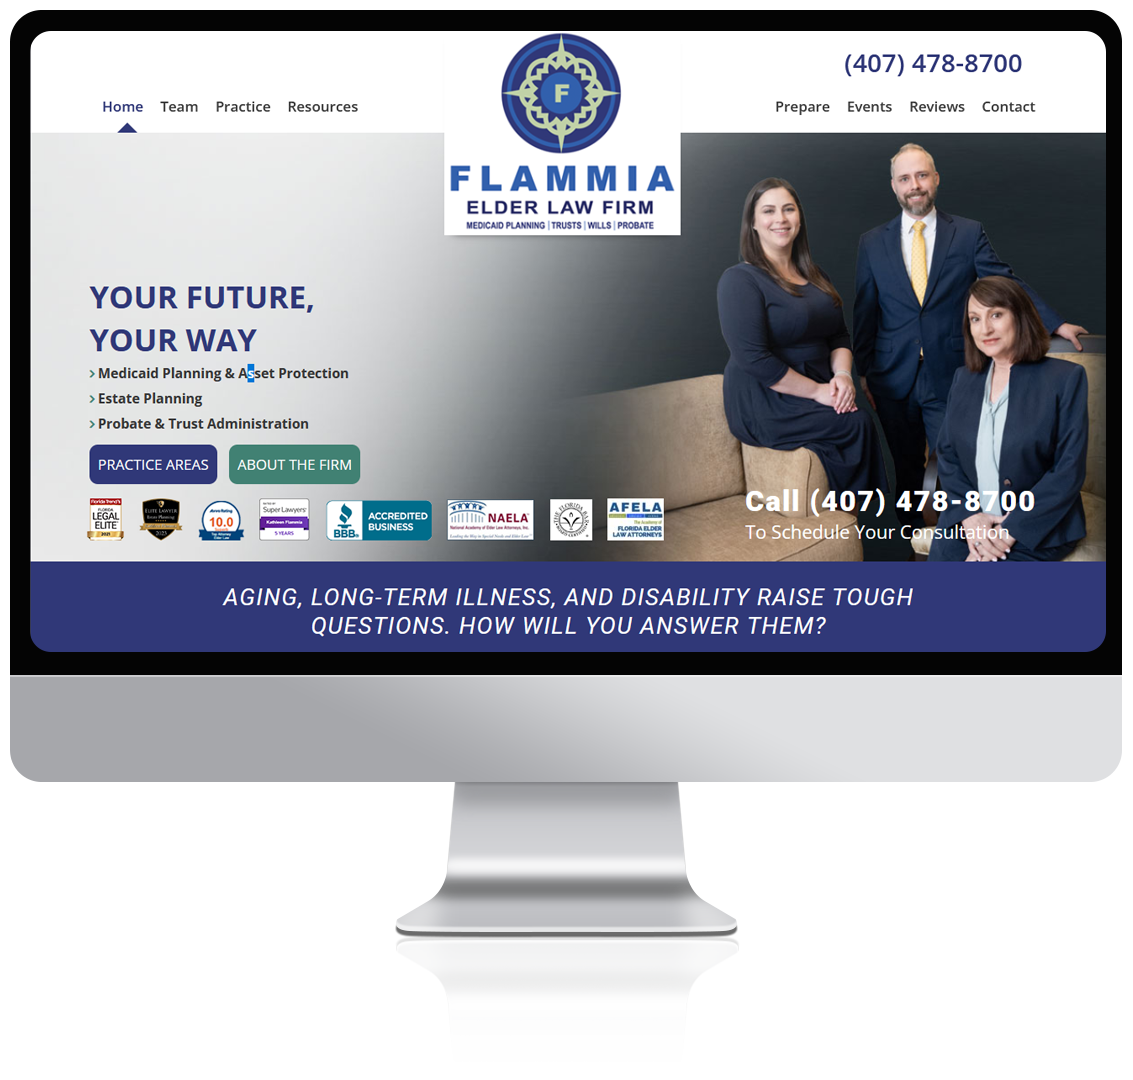 Flammia Elder Law home page on a monitor